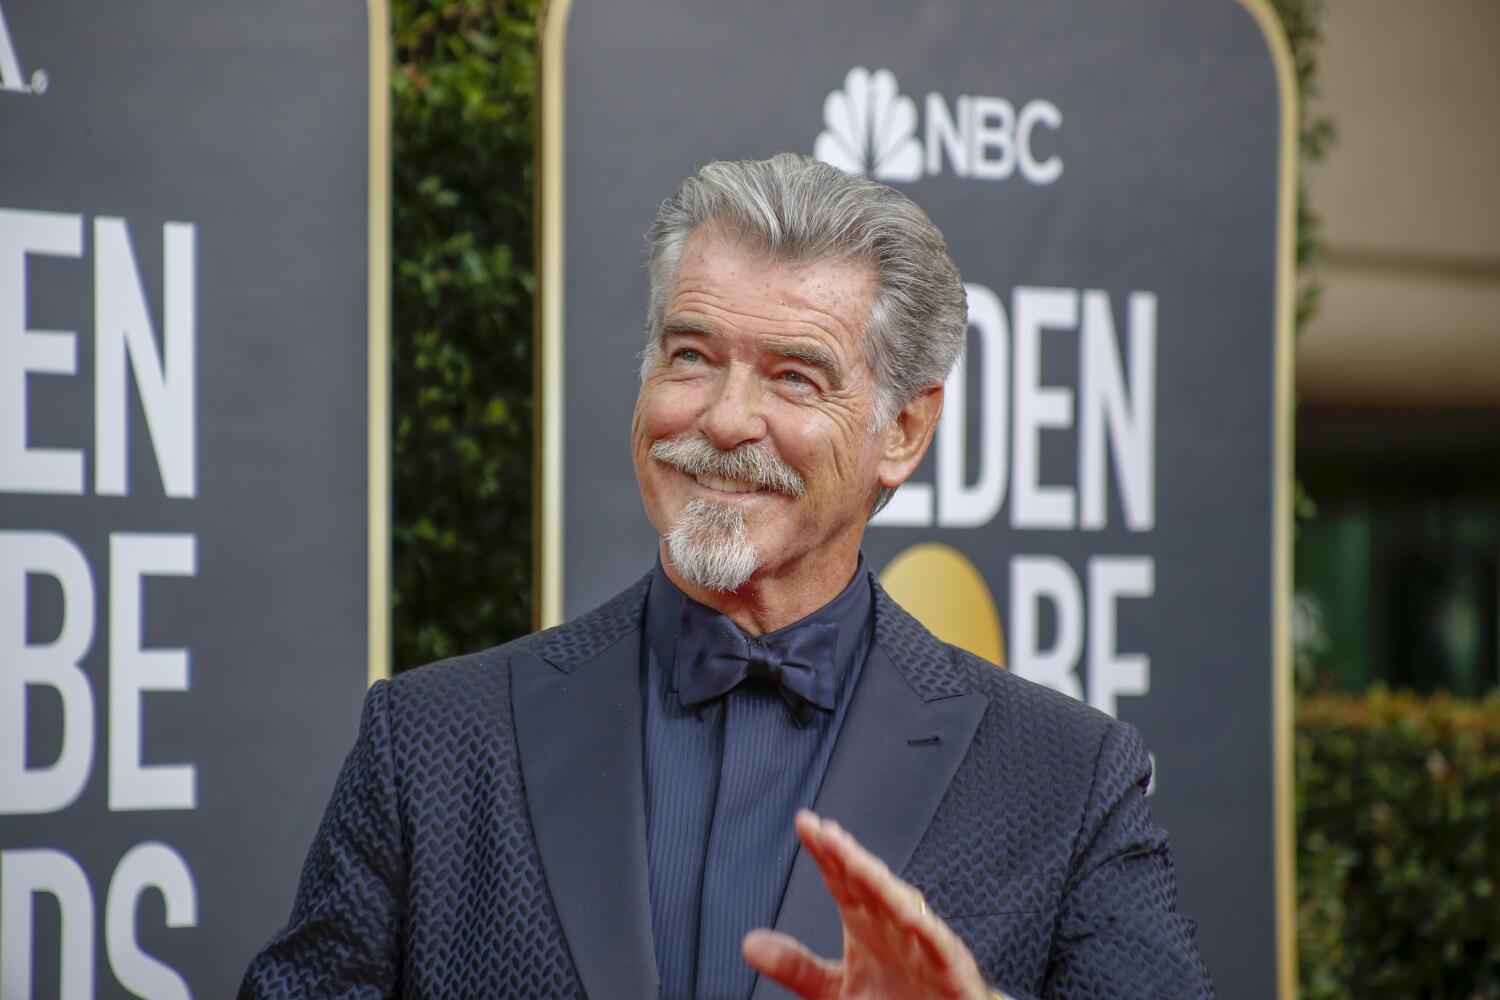 Pierce Brosnan cited for walking in a restricted geothermal area at Yellowstone park